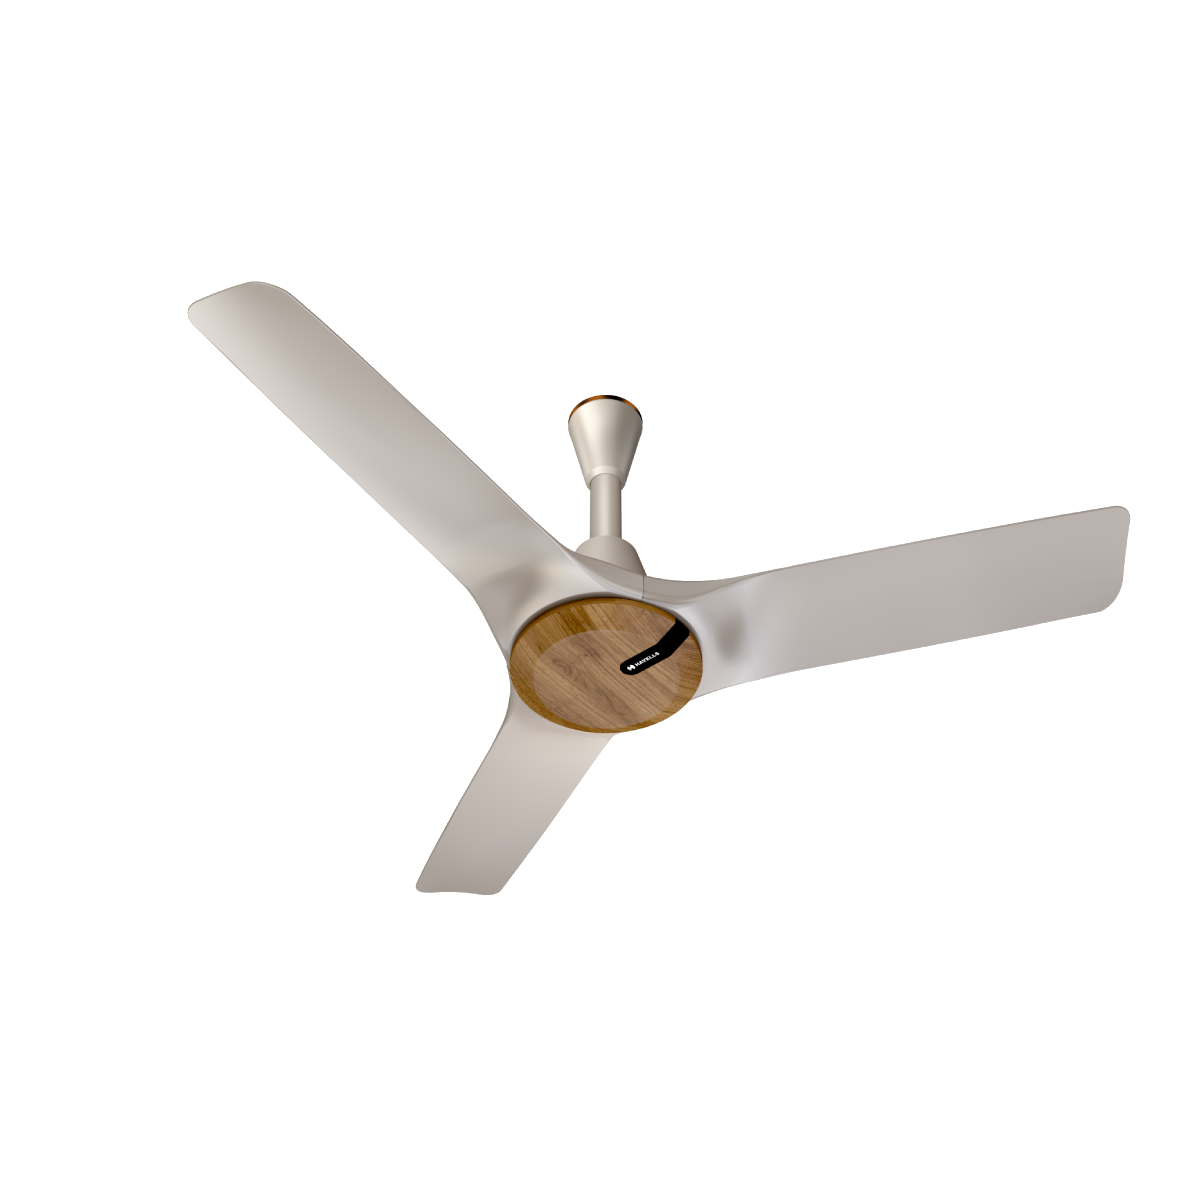 Havells BLDC Ceiling Fan 1200mm STEALTH NEO BLDC